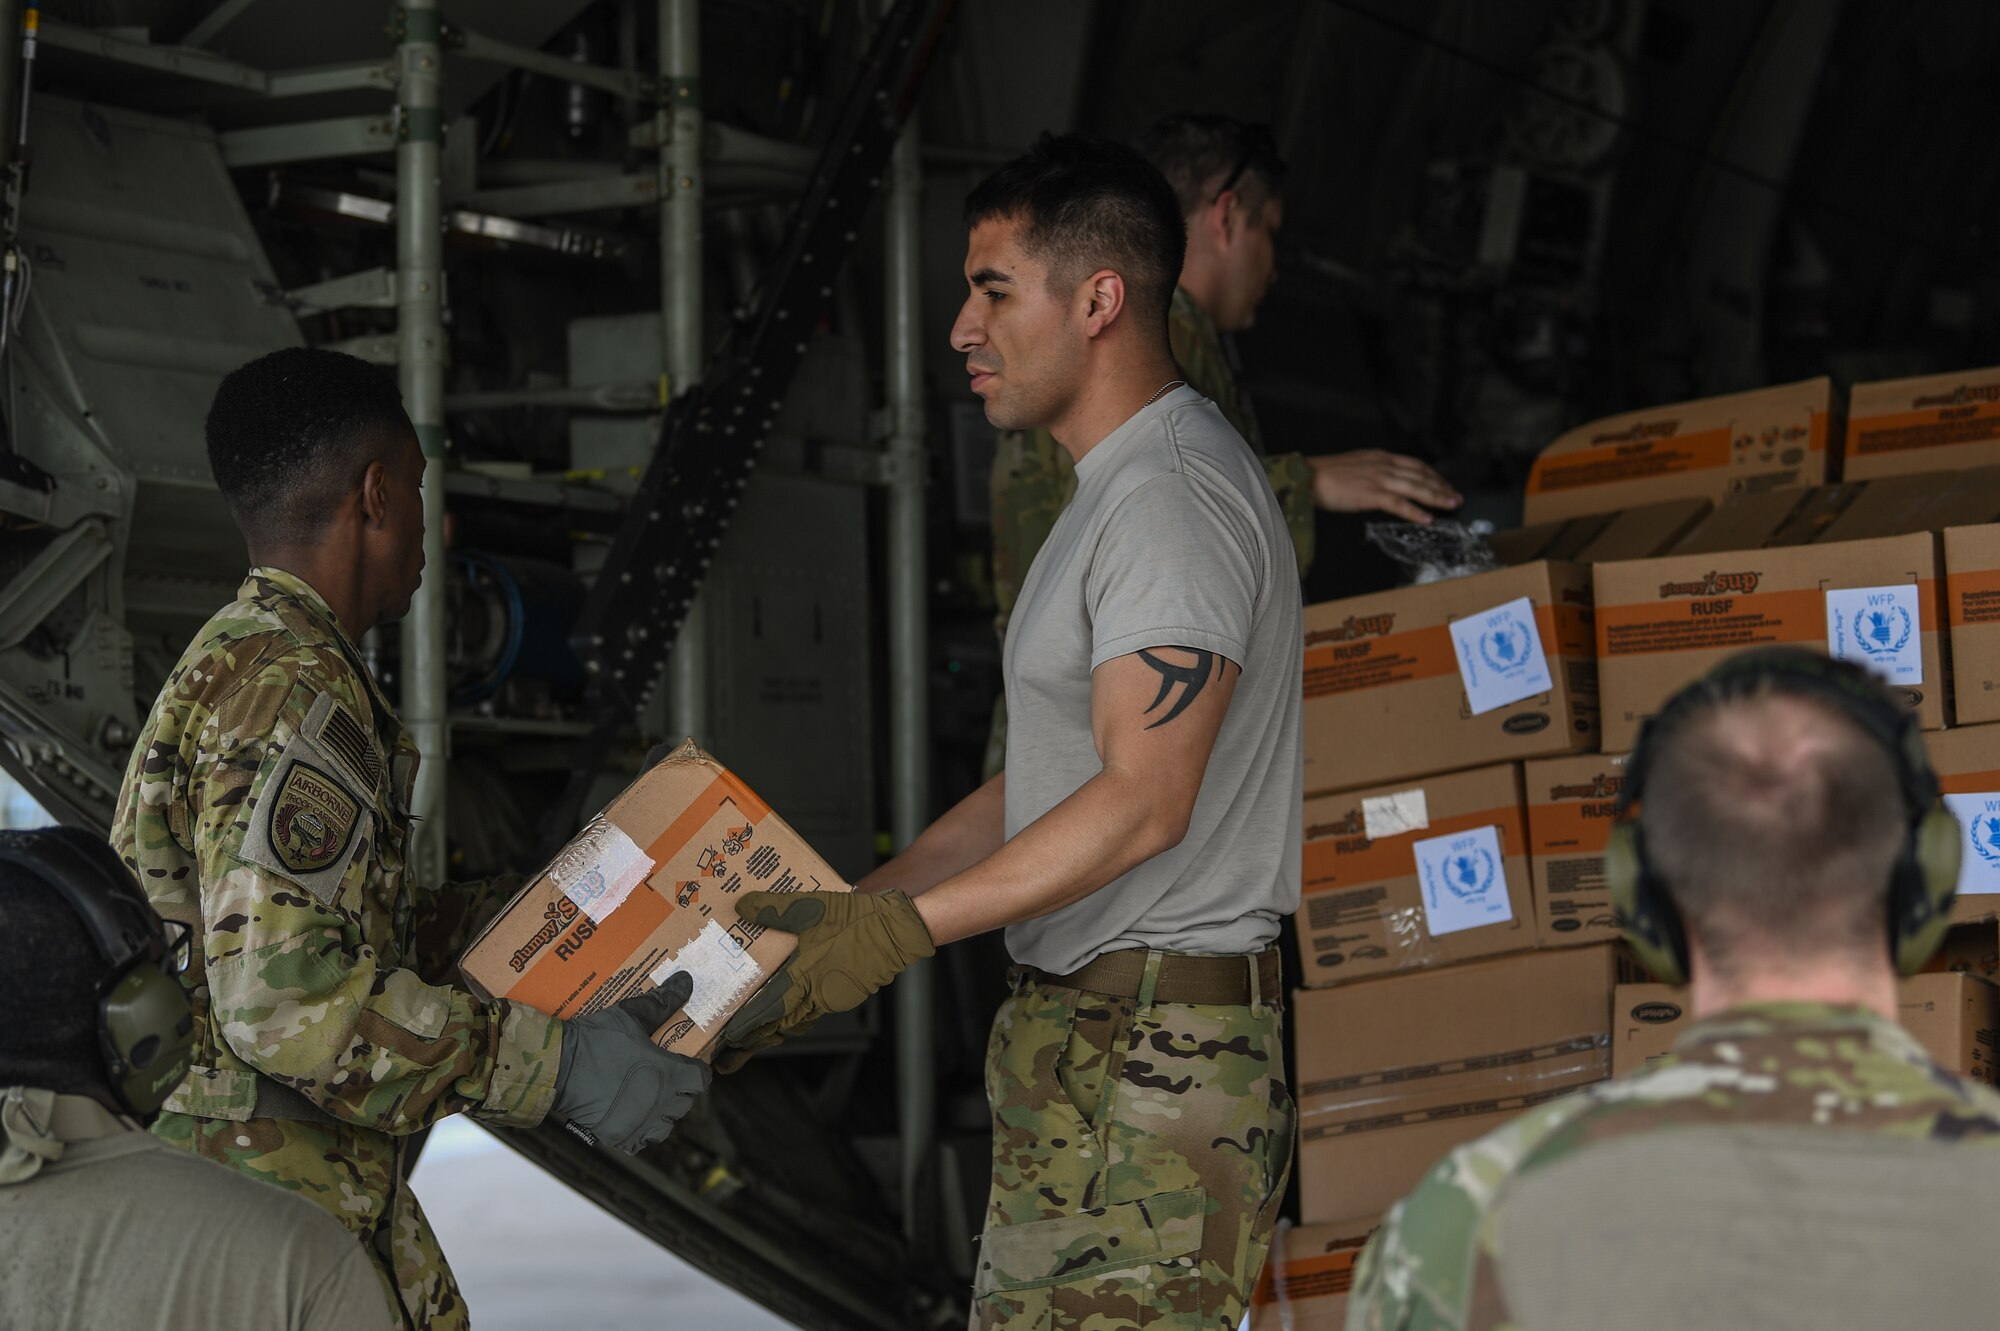 U.S. Airmen assigned to the 75th Expeditionary Airlift Squadron, Combined Joint Task Force-Horn of Africa (CJTF-HOA), offload humanitarian aid from a C-130J Hercules at Beira Airport, Mozambique, April 2, 2019, for the U.S. Department of Defense’s (DoD) relief effort in the Republic of Mozambique and surrounding areas following Cyclone Idai. Teams from CJTF-HOA, which is leading DoD support to relief efforts in Mozambique, began immediate preparation to respond following a call for assistance from the U.S. Agency for International Development’s Disaster Assistance Response Team. (U.S. Air Force photo by Staff Sgt. Corban Lundborg)